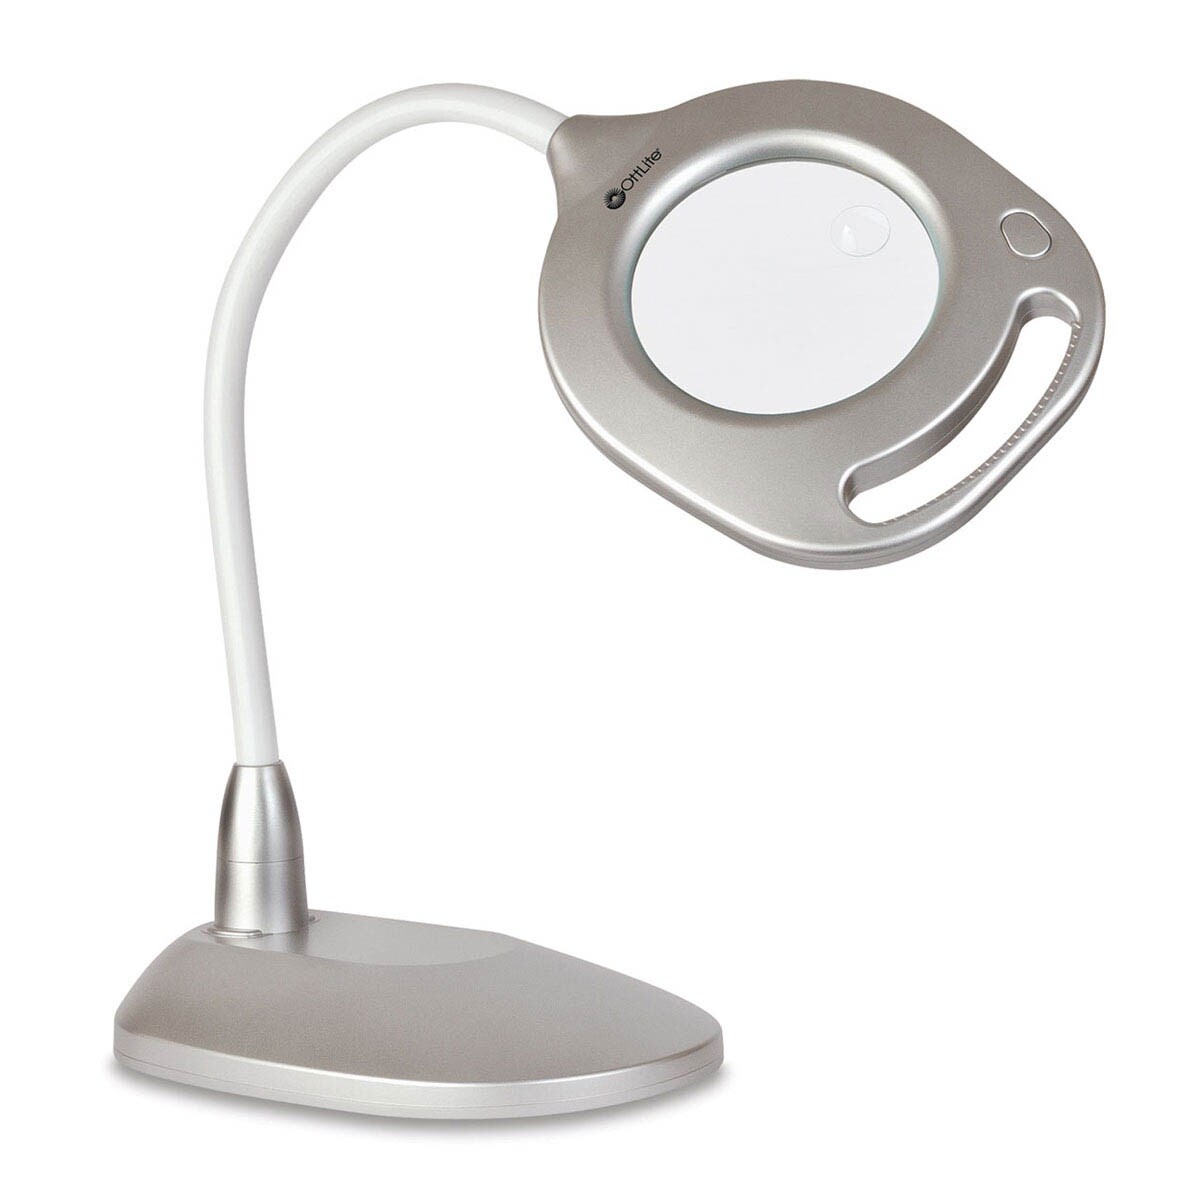 OttLite 2-in-1 LED Magnifier Floor and Table Lamp - Silver